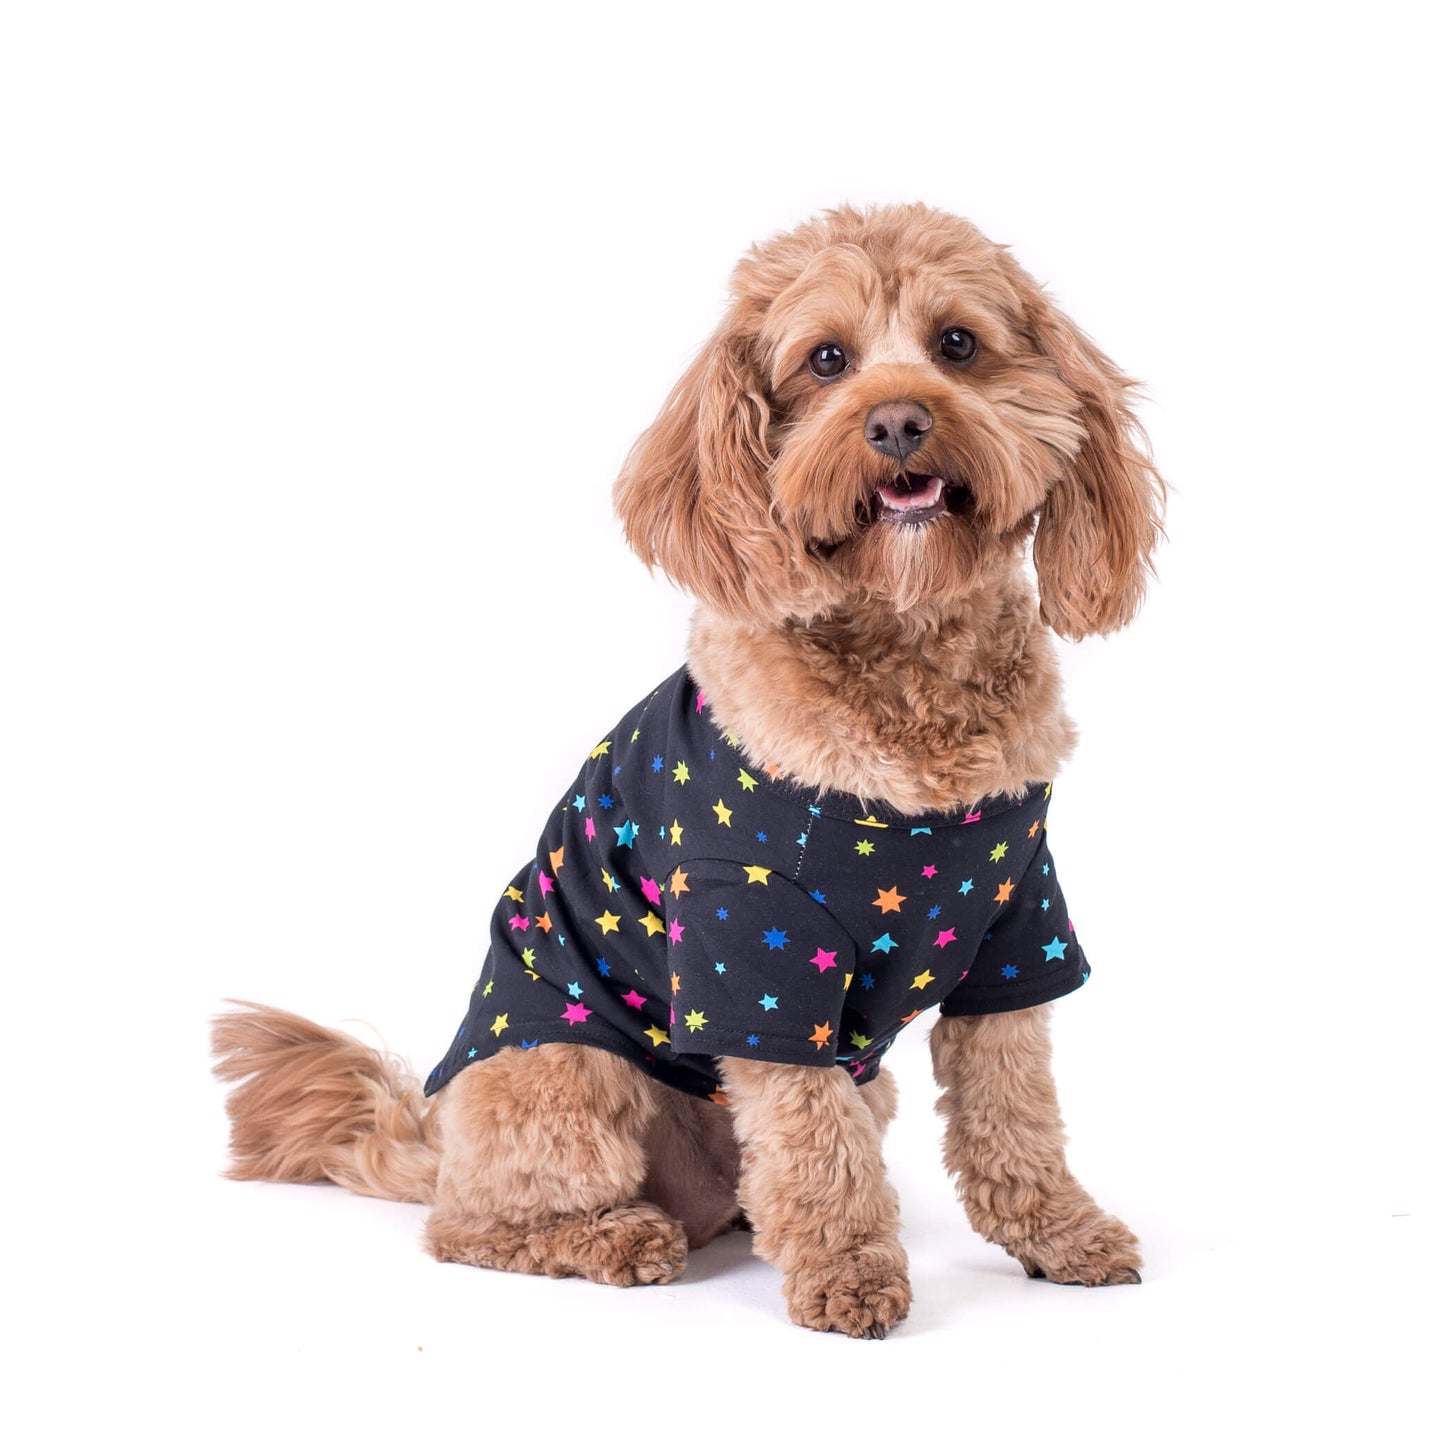 Cavoodle dog in our Star Gazer Dog Shirt - Captivating Cavoodle dog gazing forward in a black shirt with vibrant multi-colored stars - Illuminate your dog's style with the star fazer shirt - Shop now for trendy Dog Shirts and Clothing with Eye-Catching Designs.